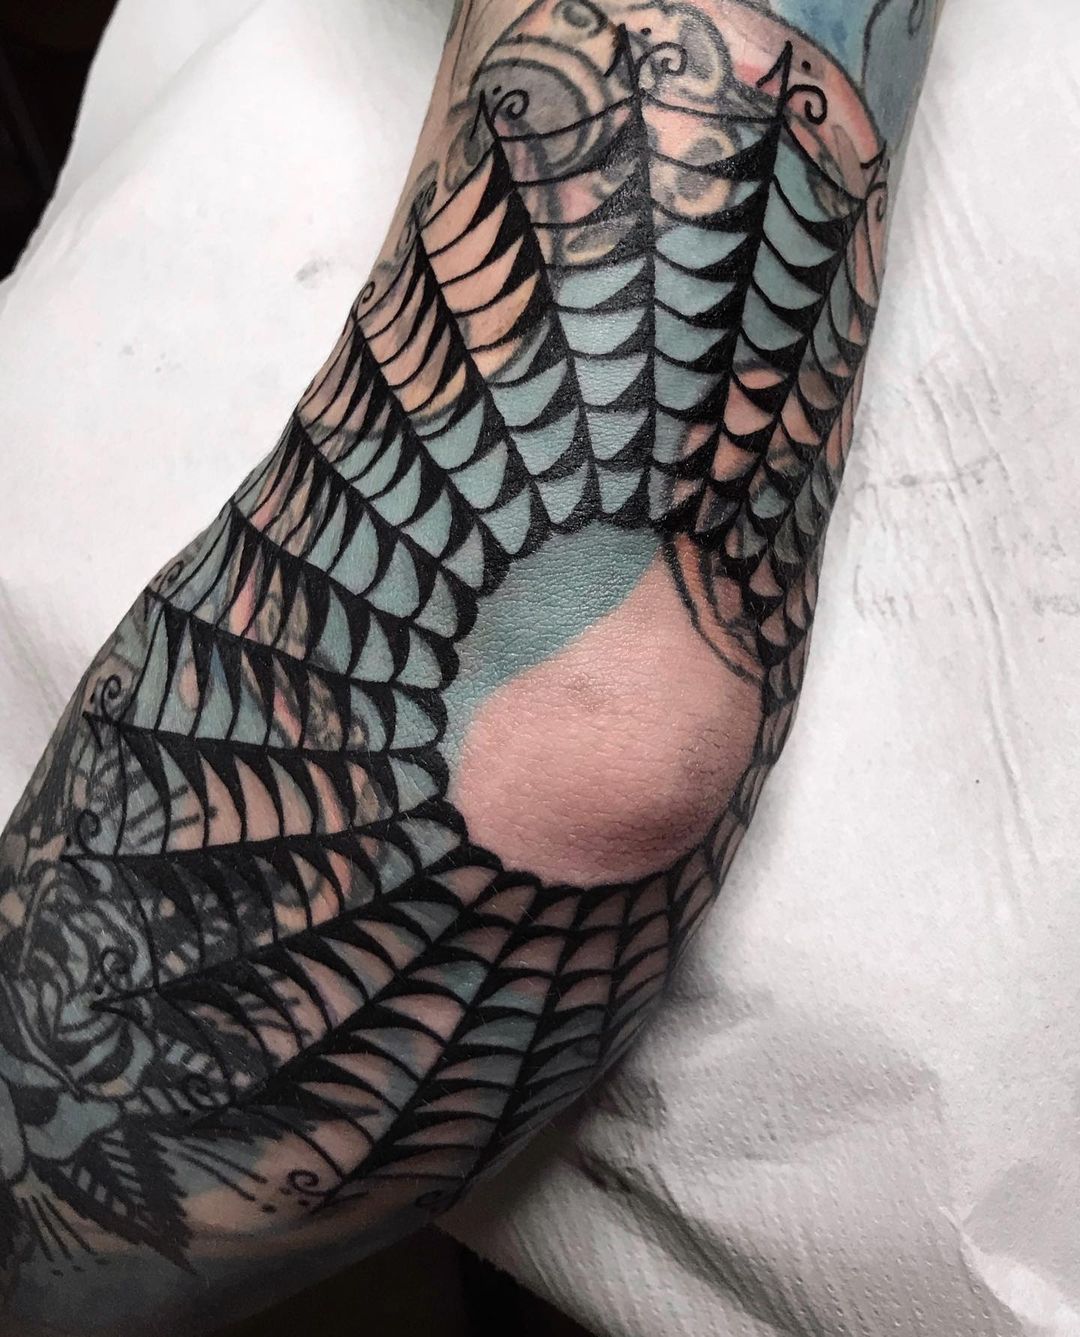 25 Blast Over Tattoos That Are Better Than Cover Ups